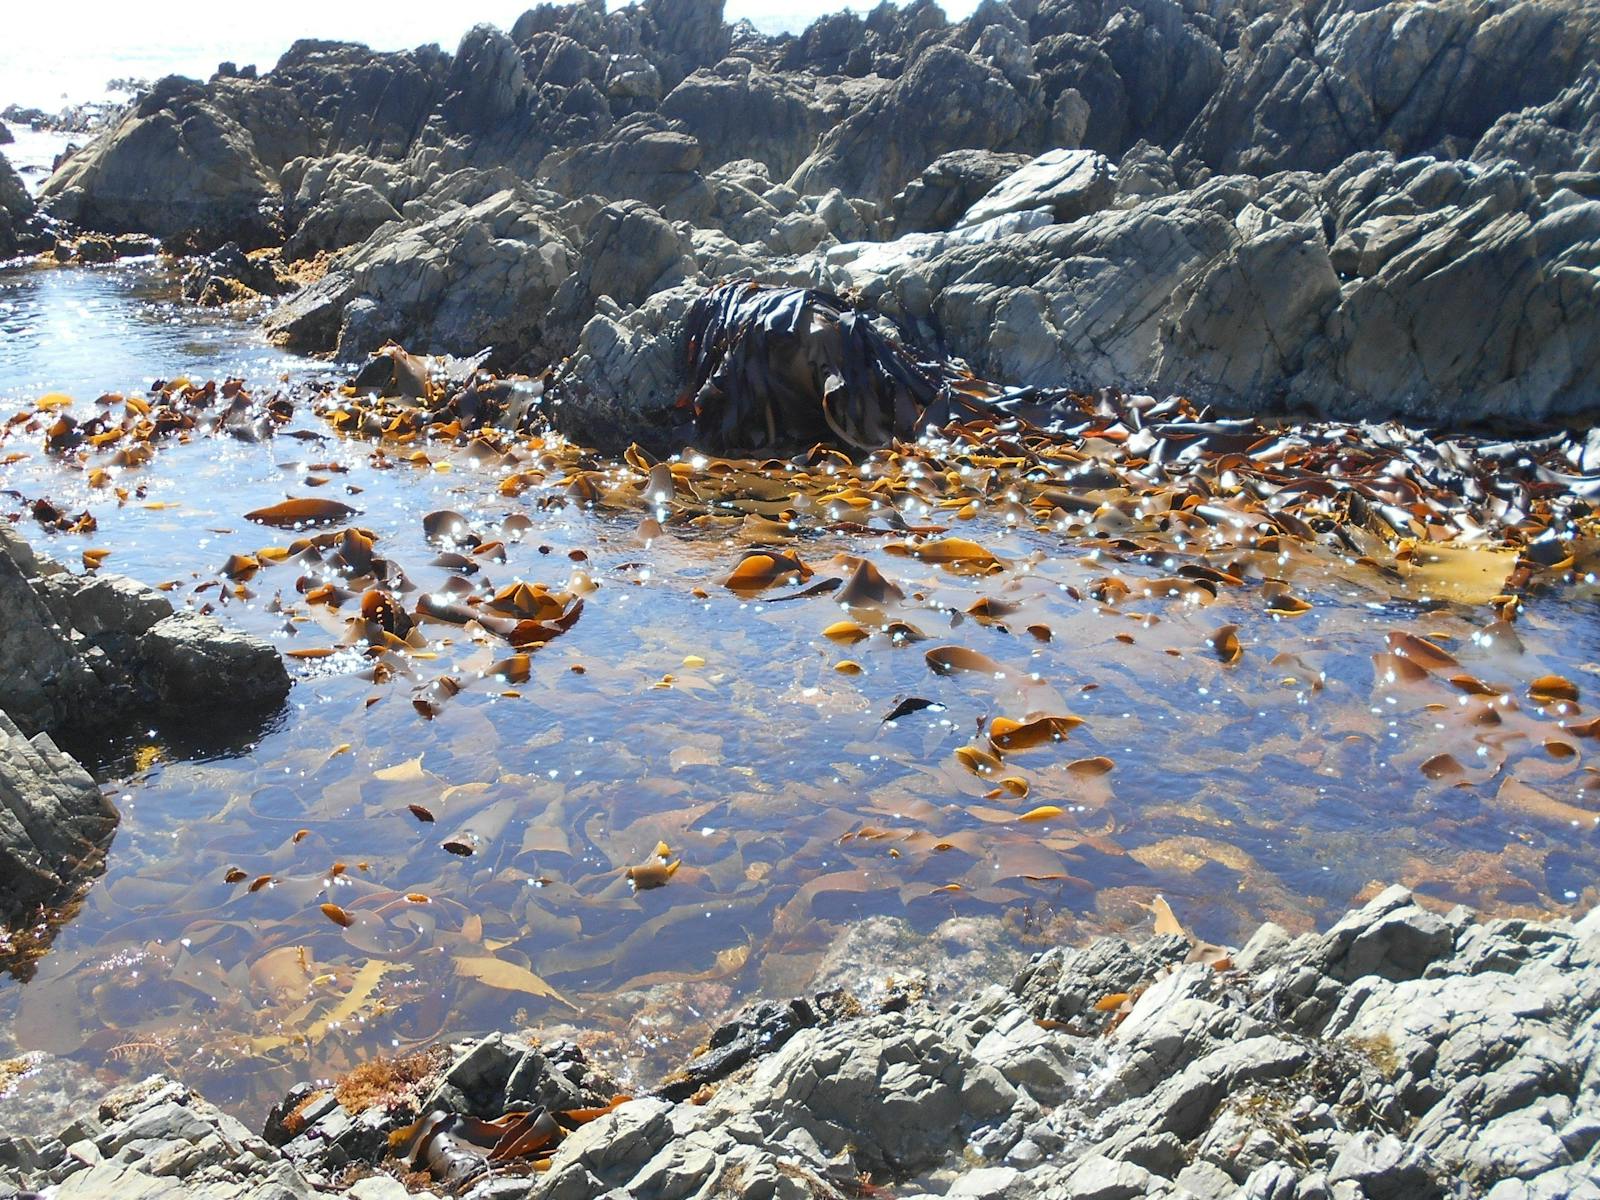 Fresh Bull Kelp which has been cast onto the shores, where it is collected.